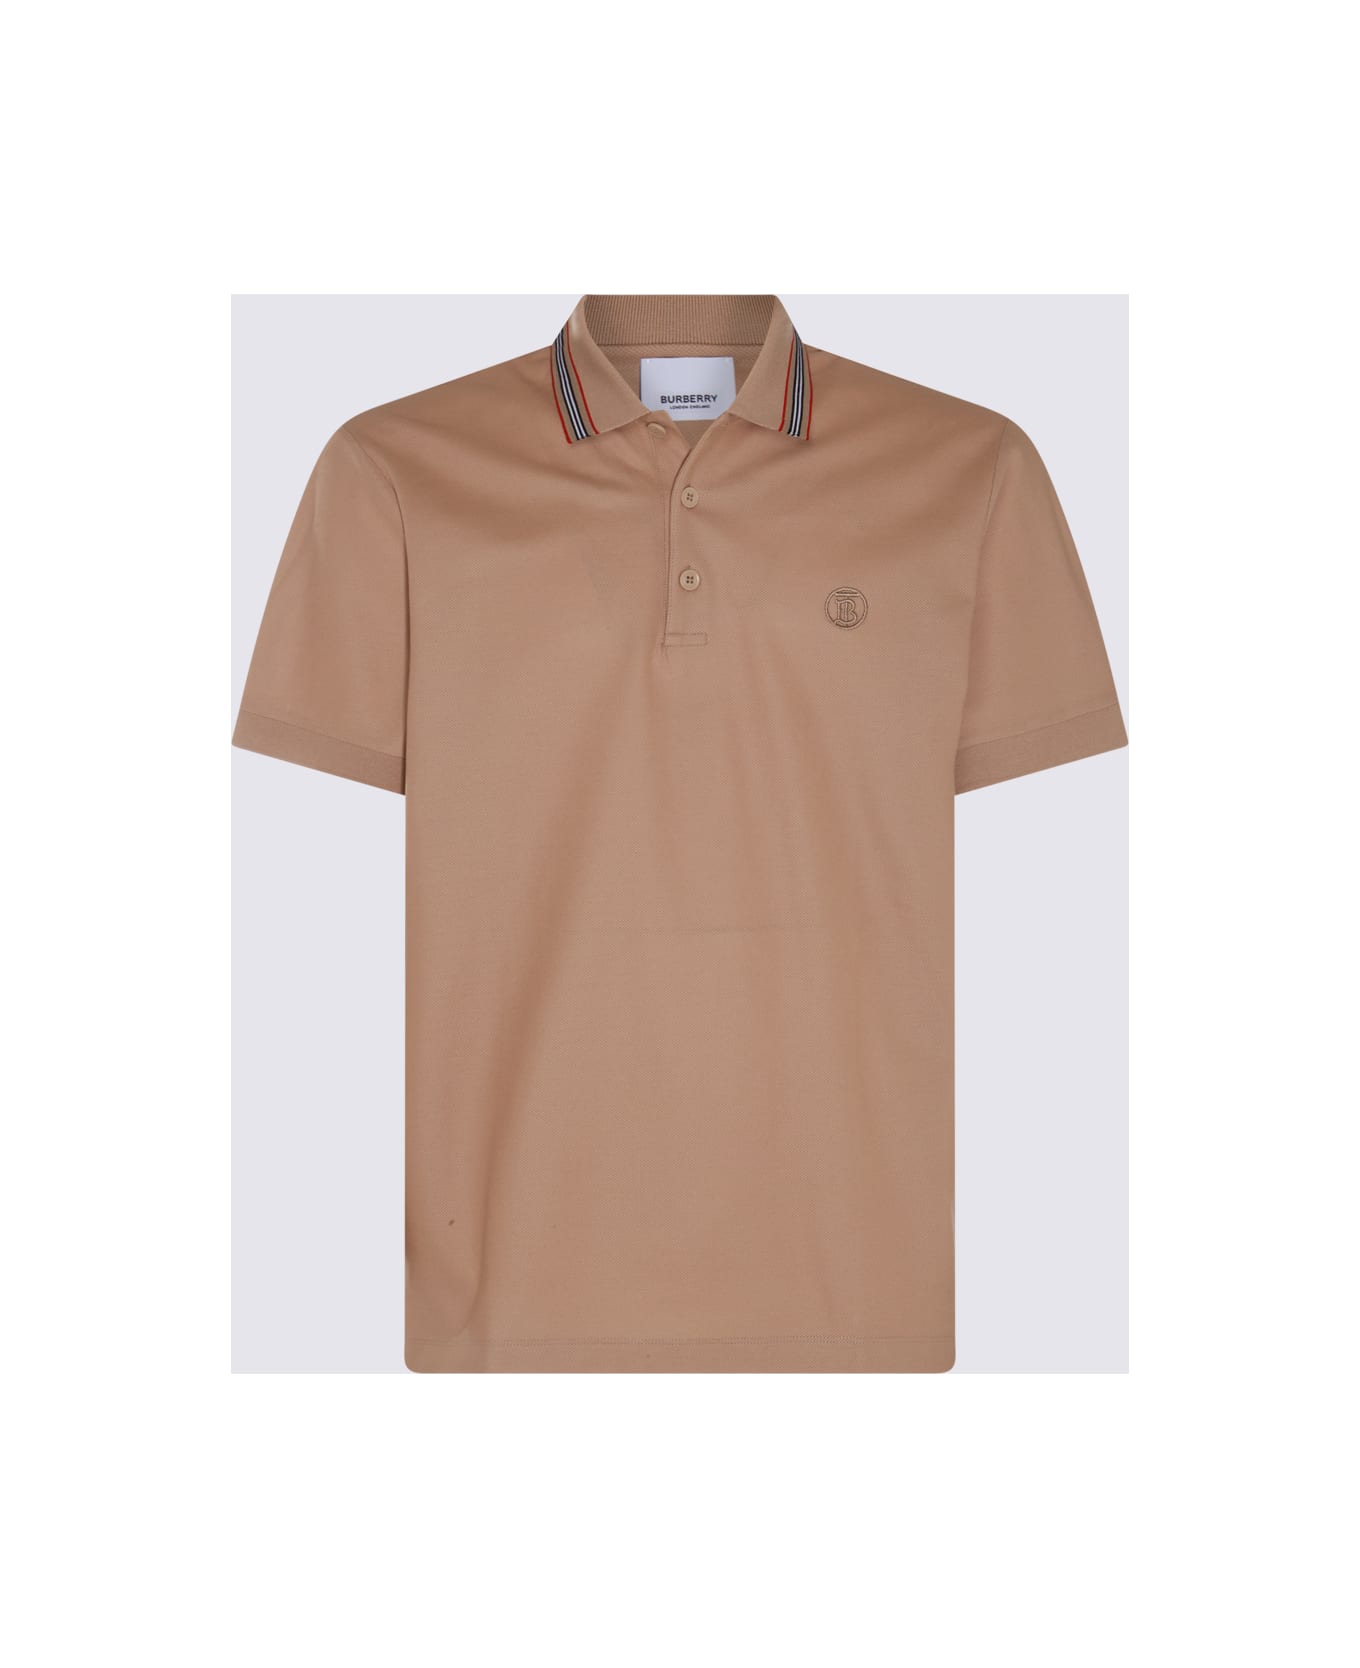 Burberry Beige Cotton Polo Shirt - SOFTFAWN ポロシャツ